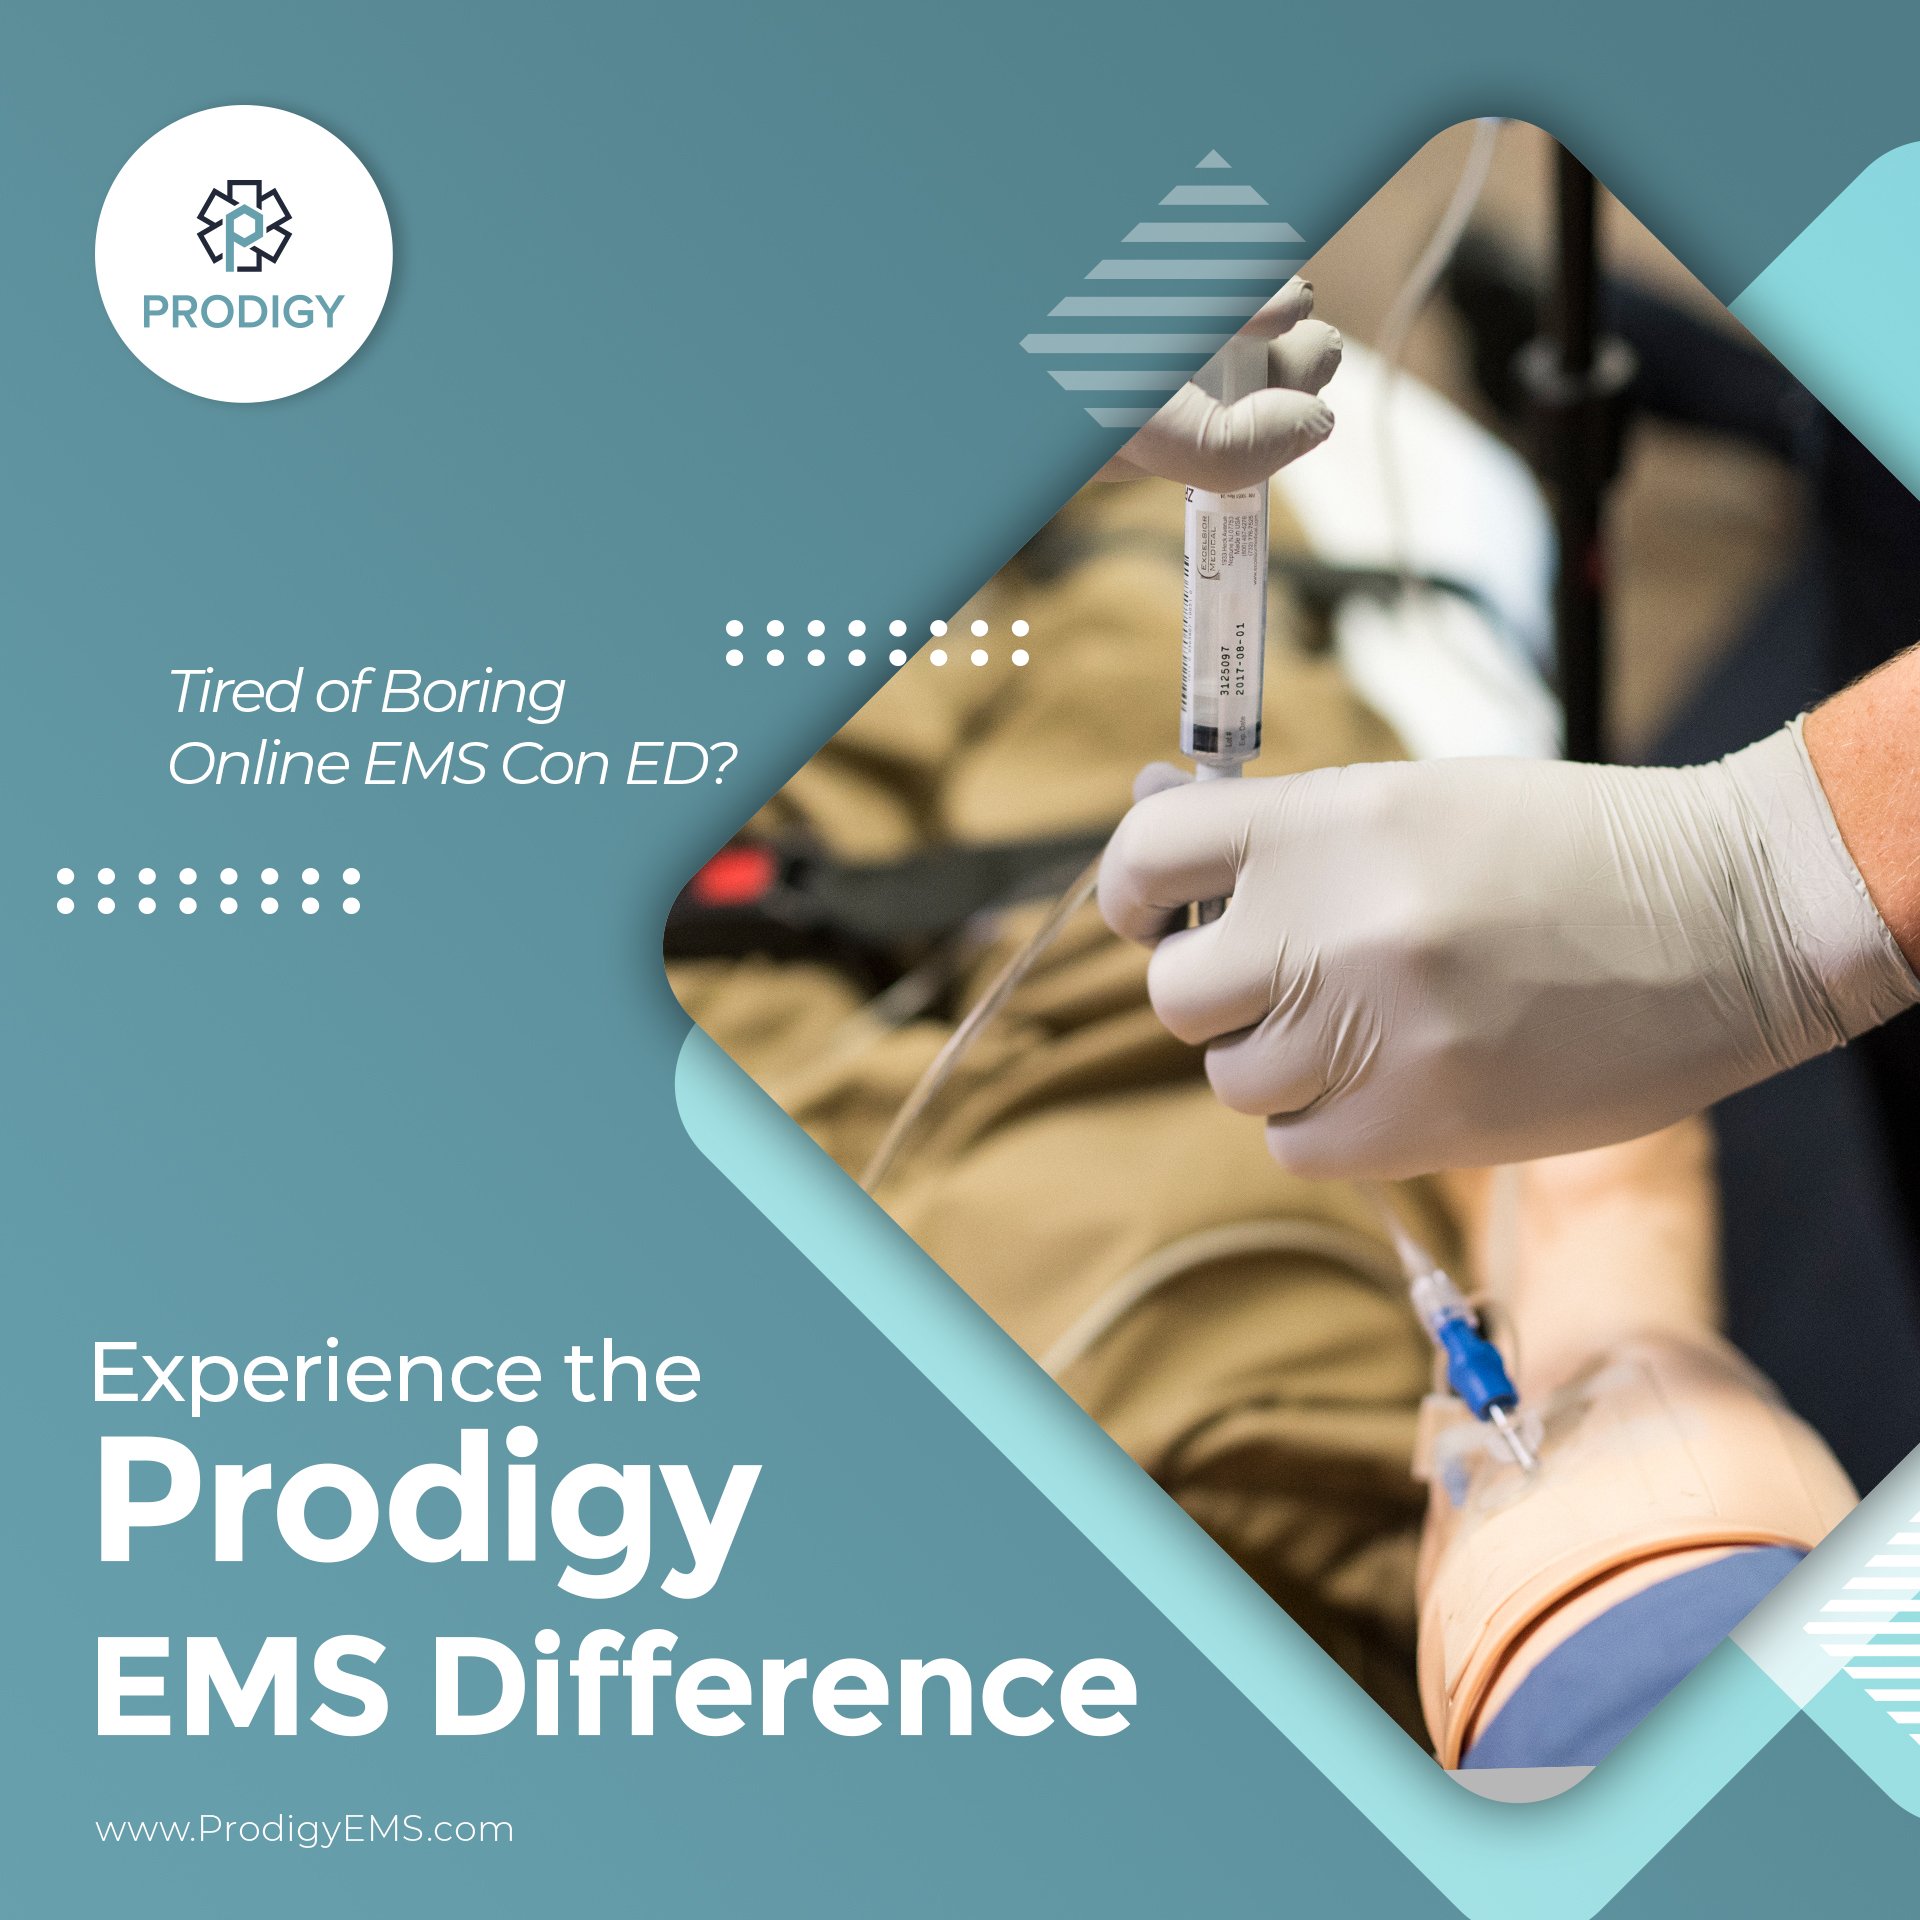 Experience the Prodigy EMS Difference IV